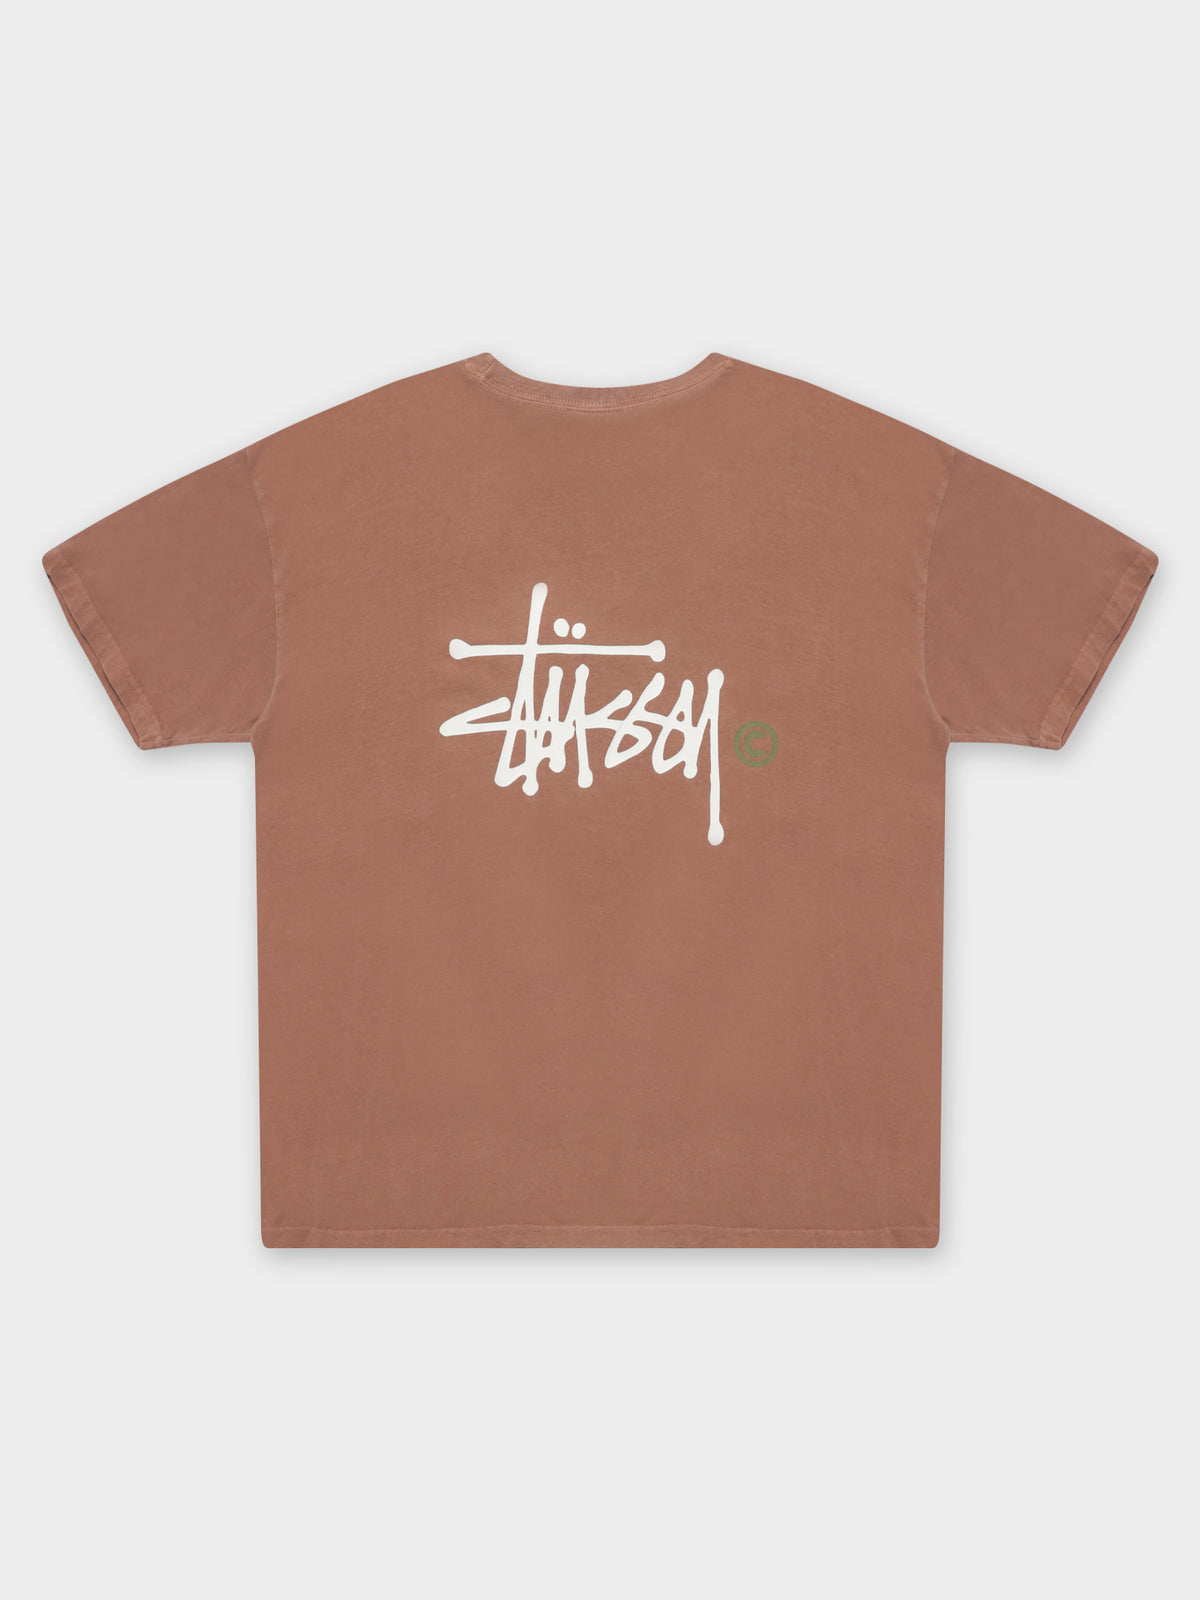 Graffiti Pigment Relaxed T-Shirt in Sienna